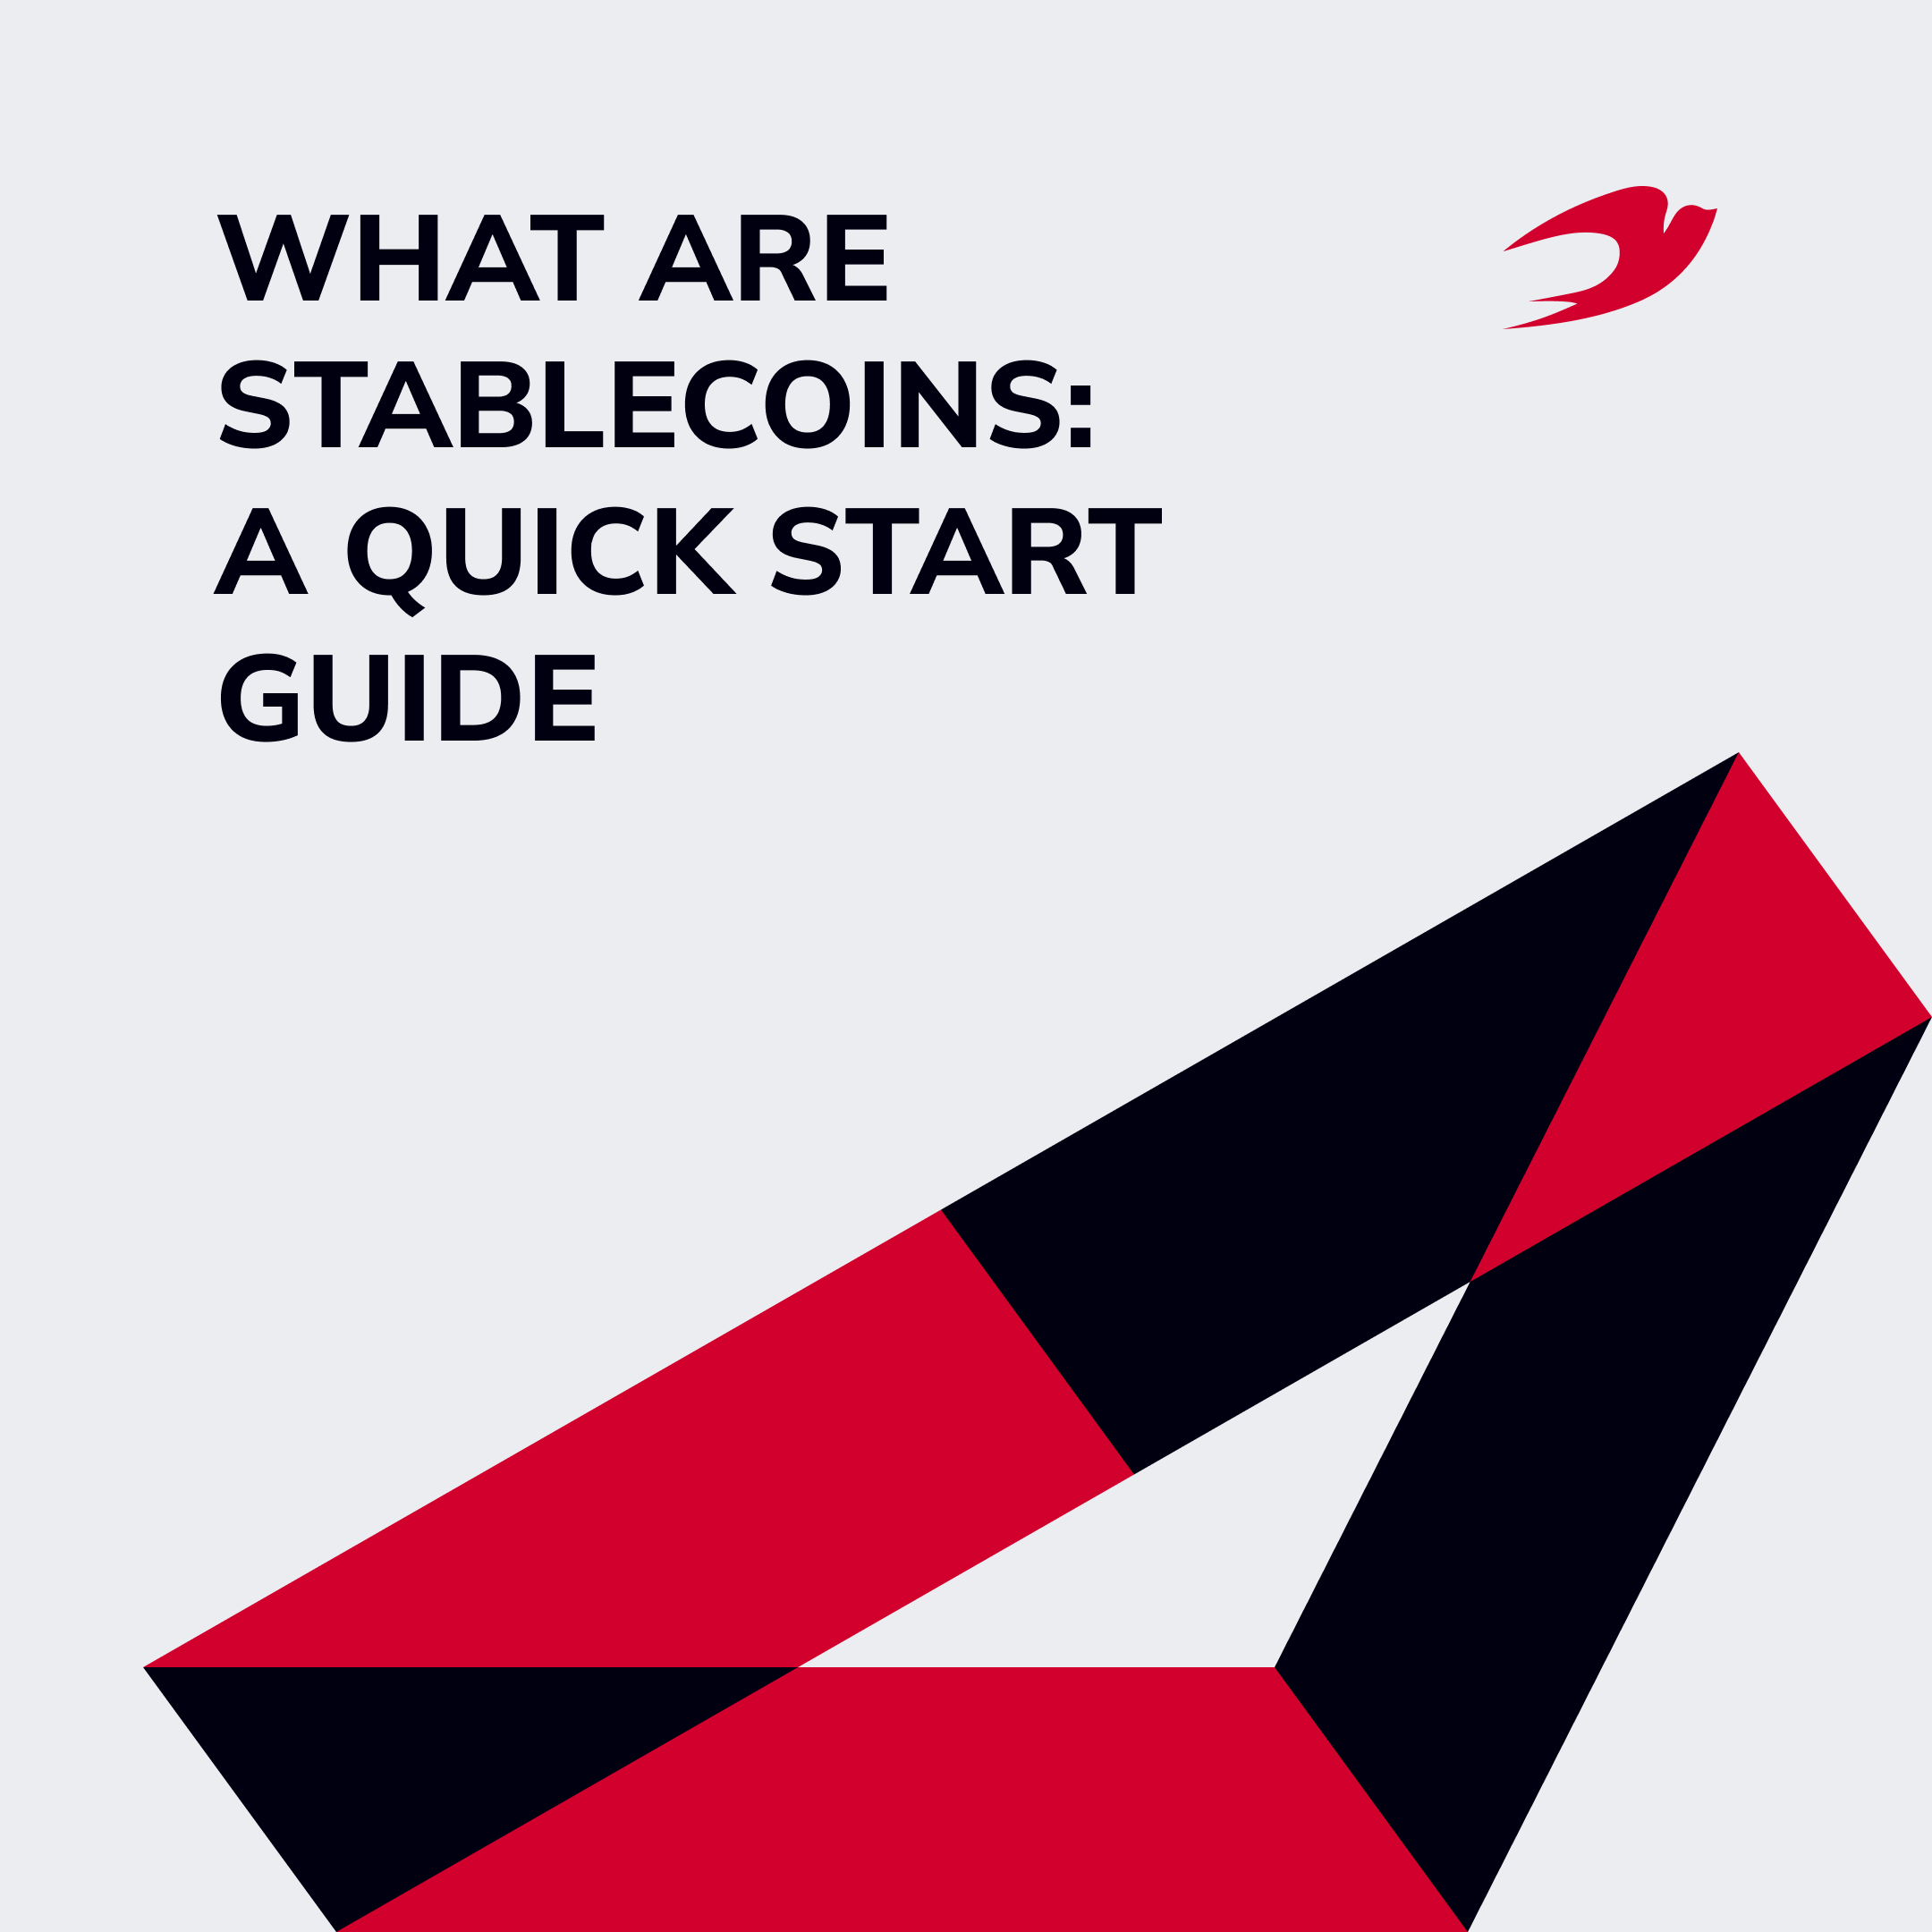 What Are Stablecoins: A Quick Start Guide